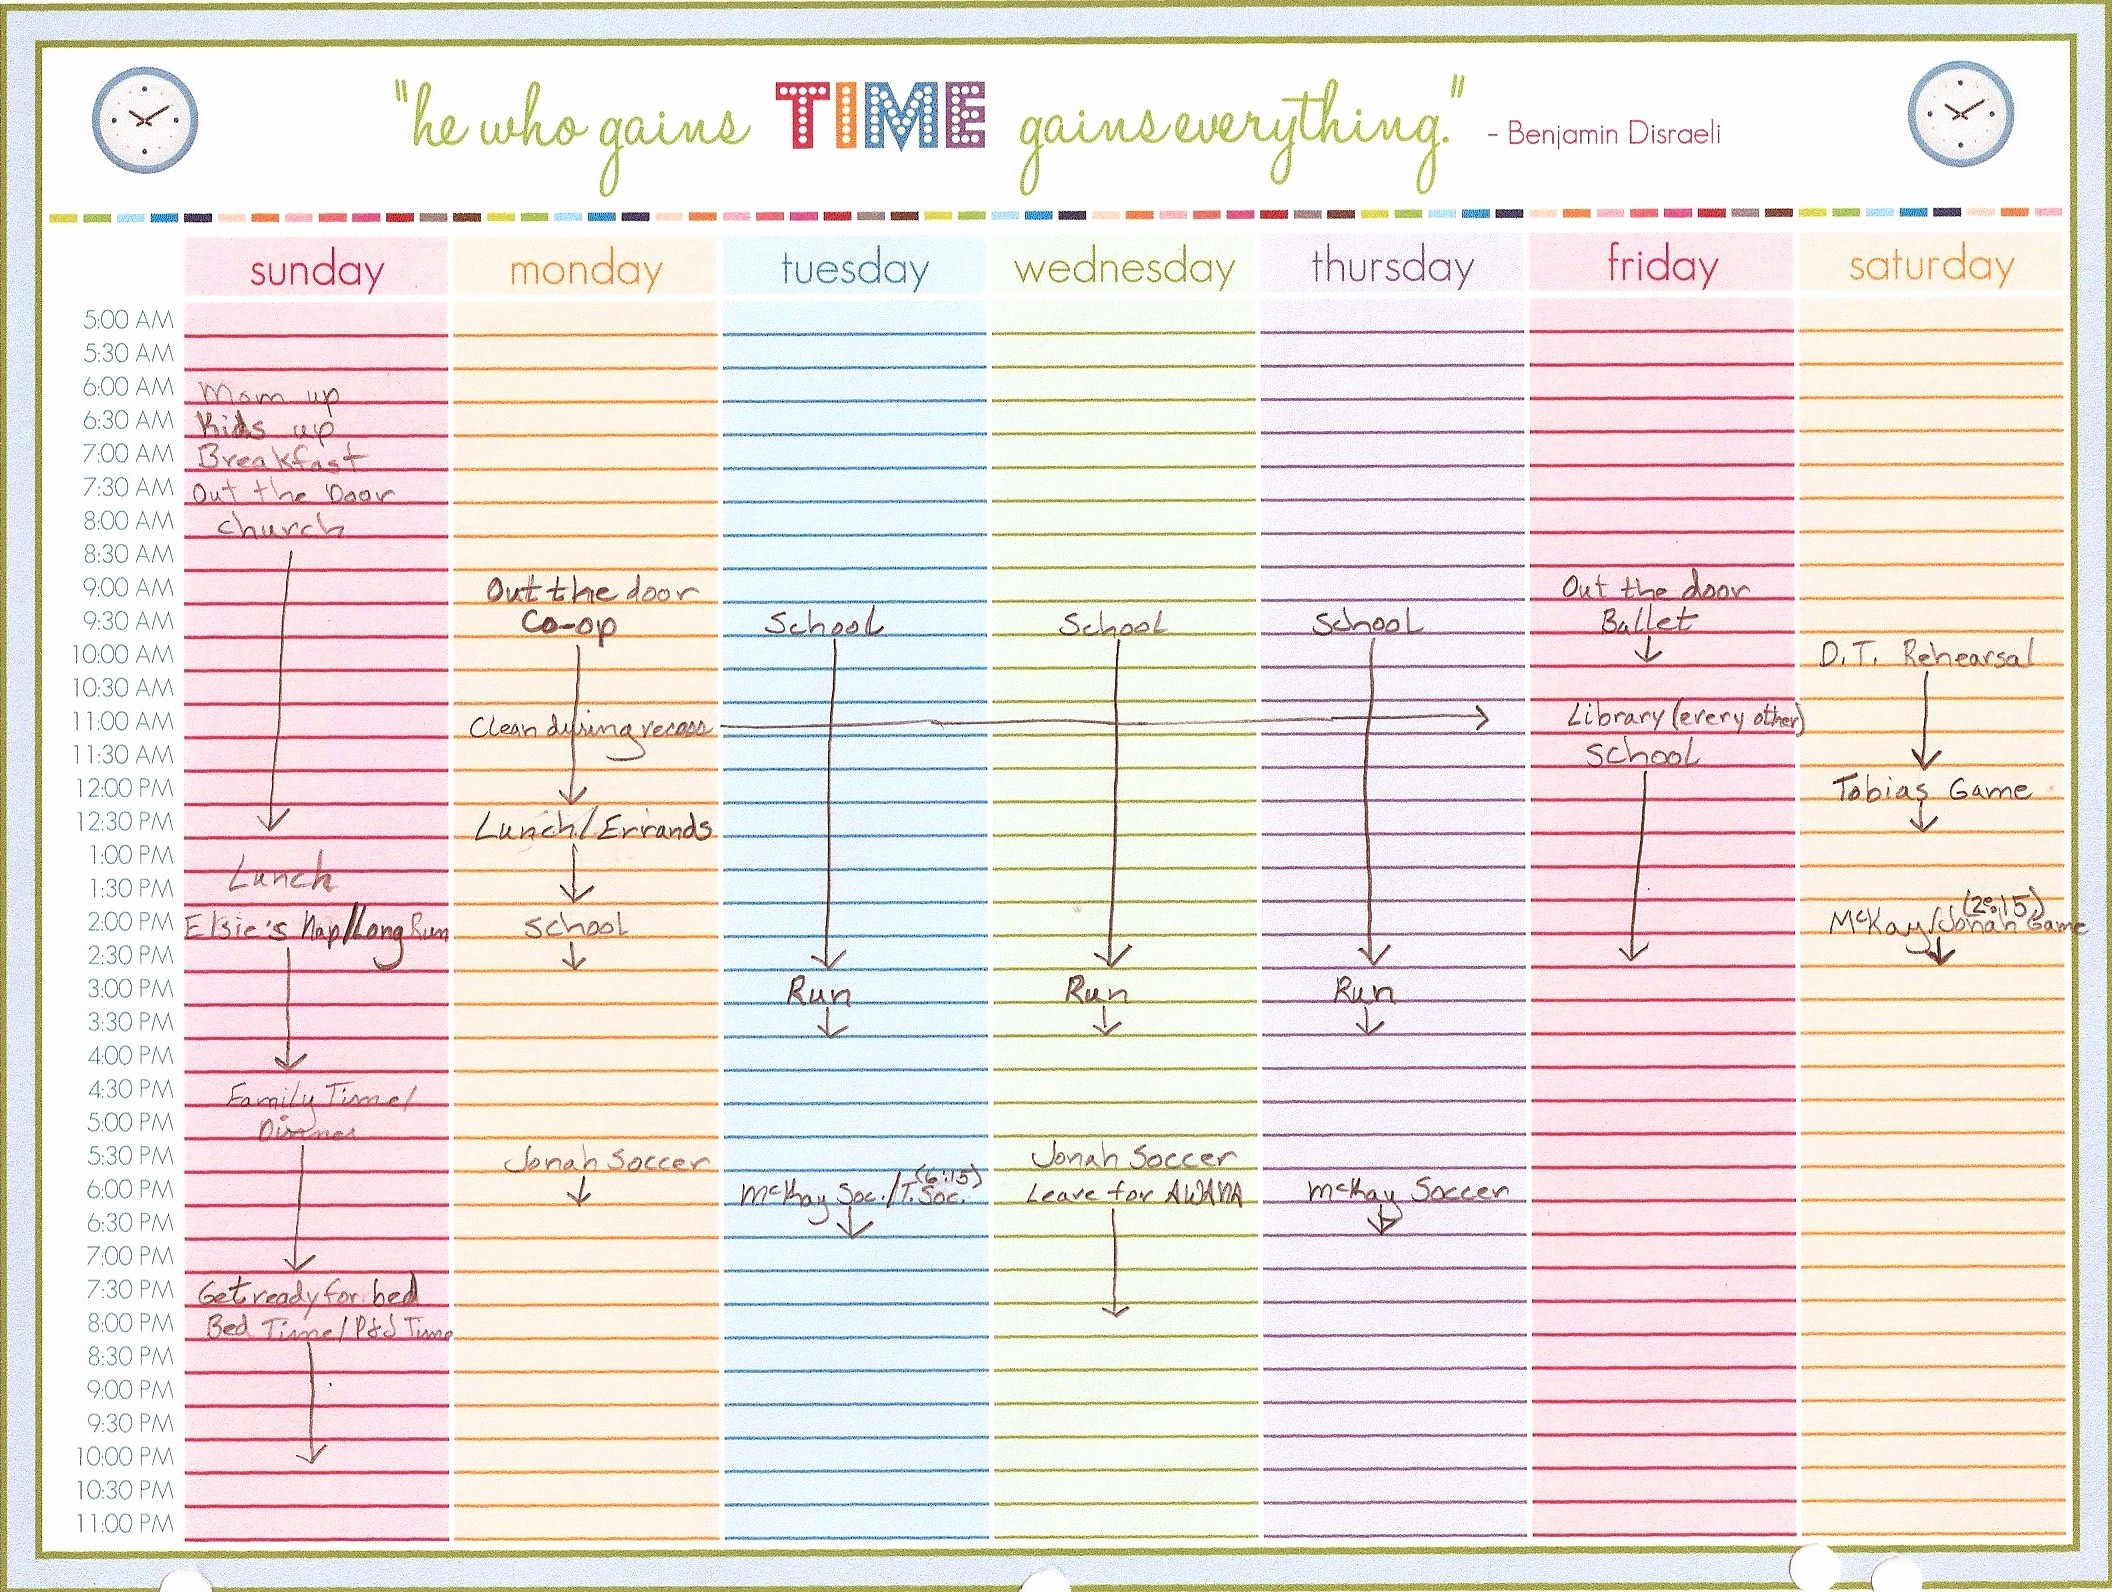 45 Daily Planner With Time Slots | Ufreeonline Template throughout Weekly Planner With Time Slots Template